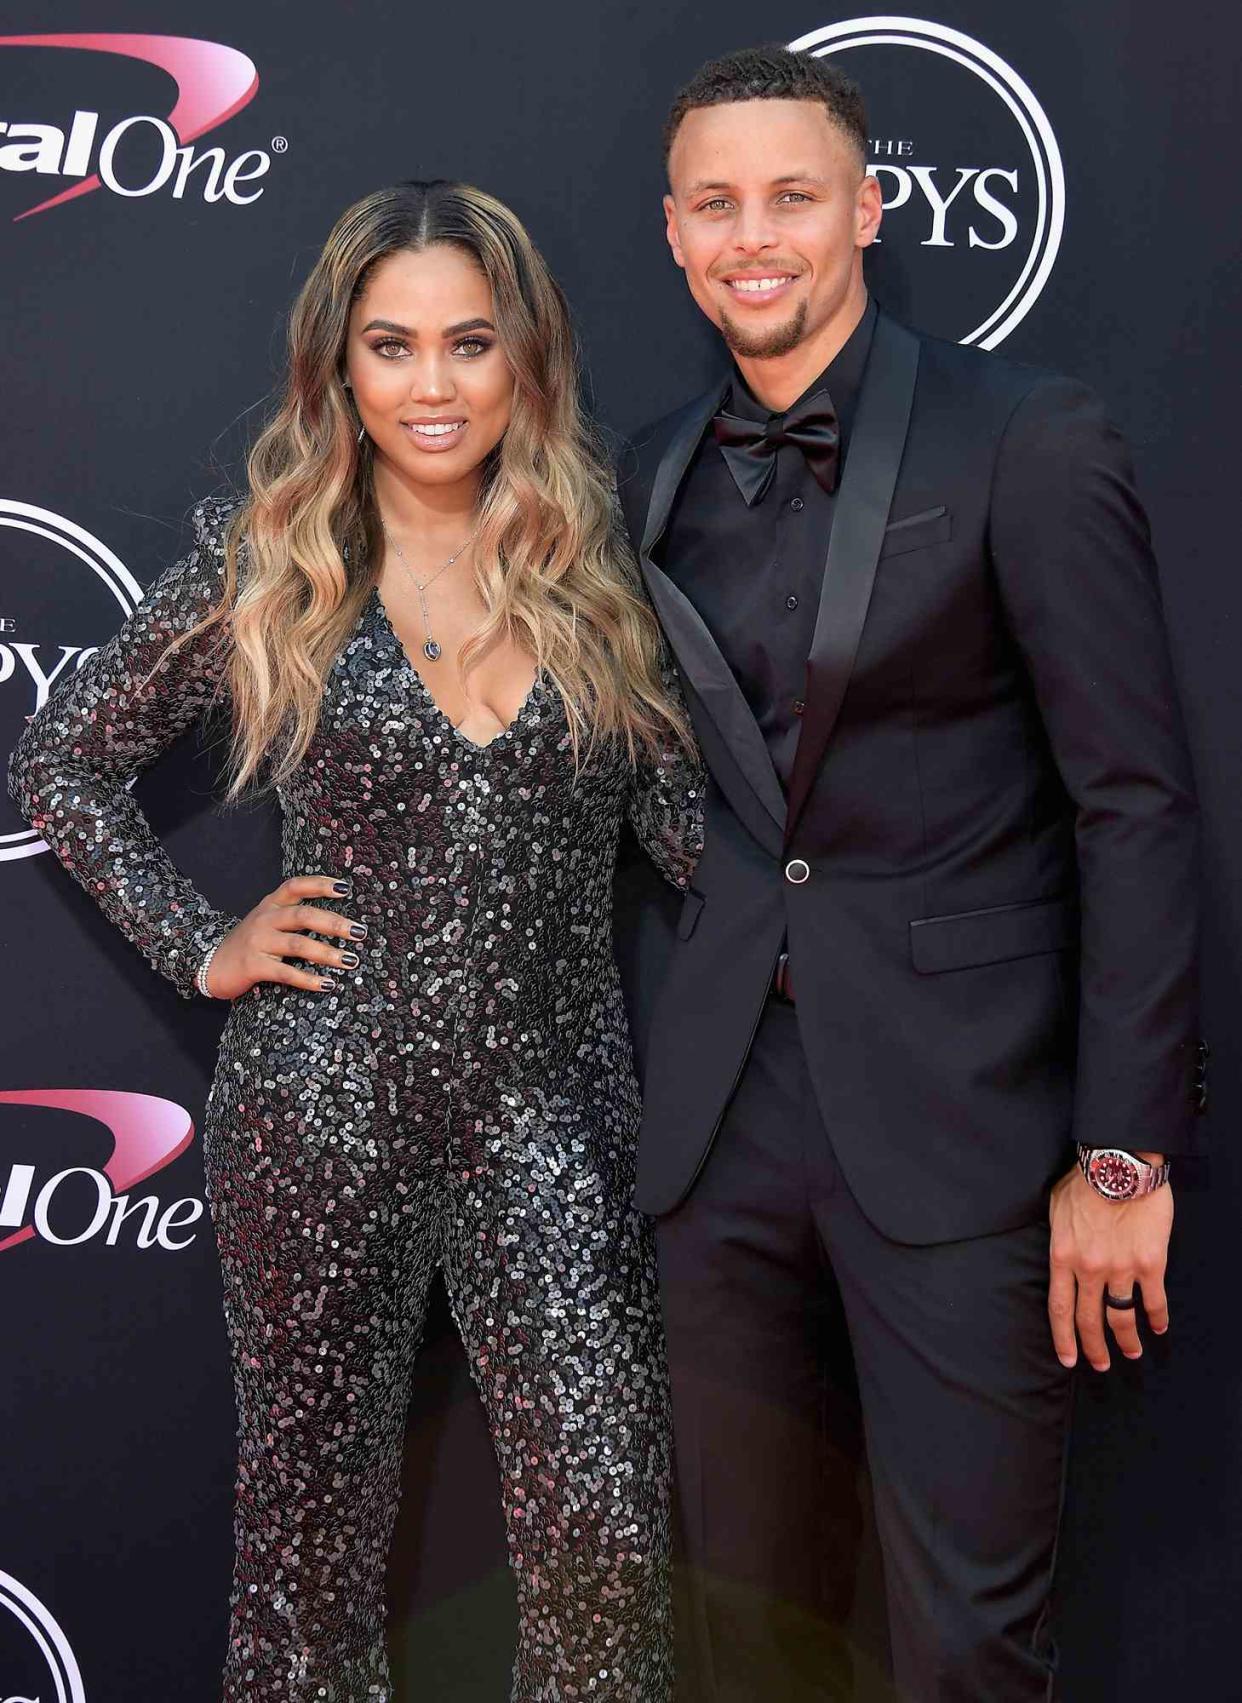 NBA player Steph Curry (R) and Ayesha Curry attend The 2017 ESPYS at Microsoft Theater on July 12, 2017 in Los Angeles, California